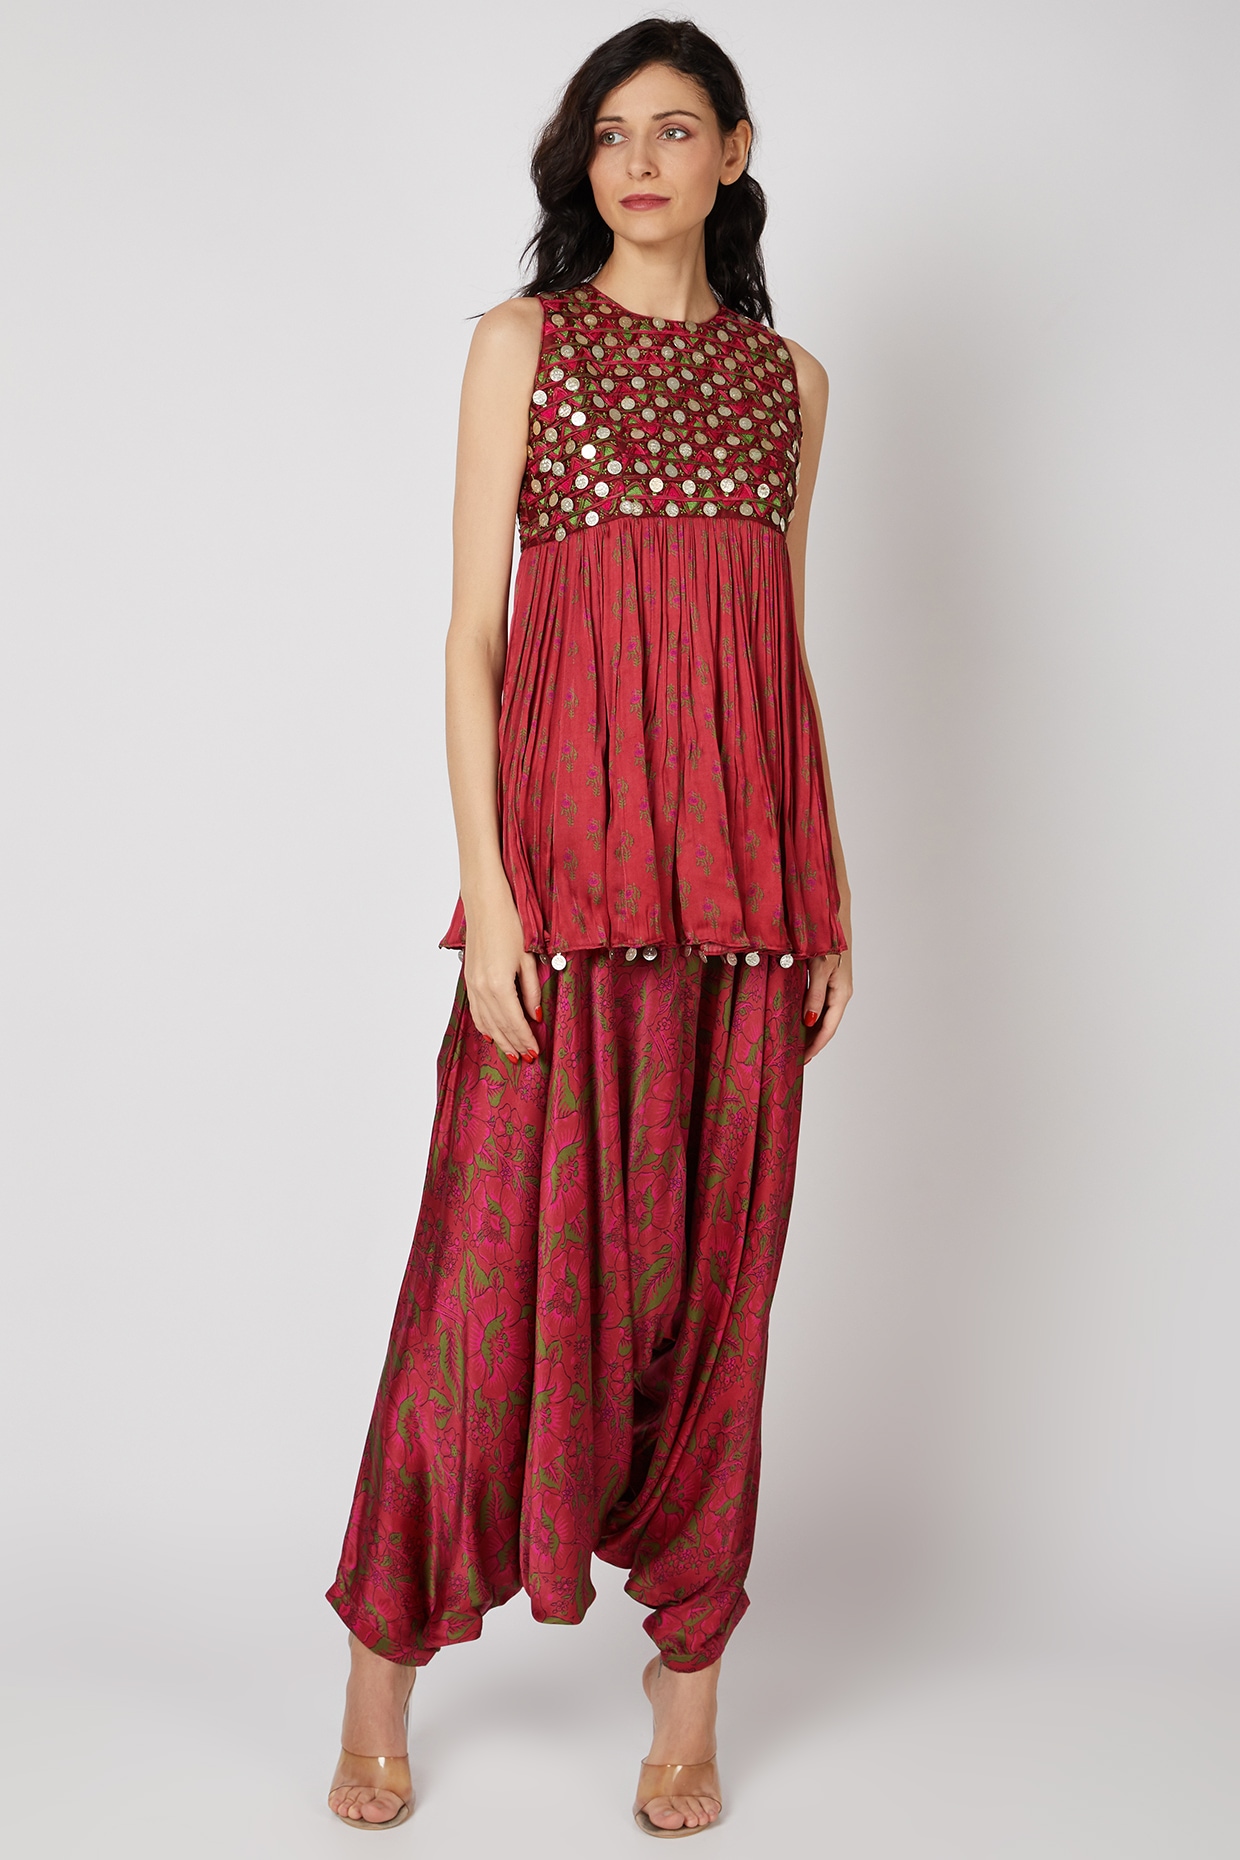 Buy Red Solid Polyester Stitched Dhoti Pants With Shawl - Tattva.Life